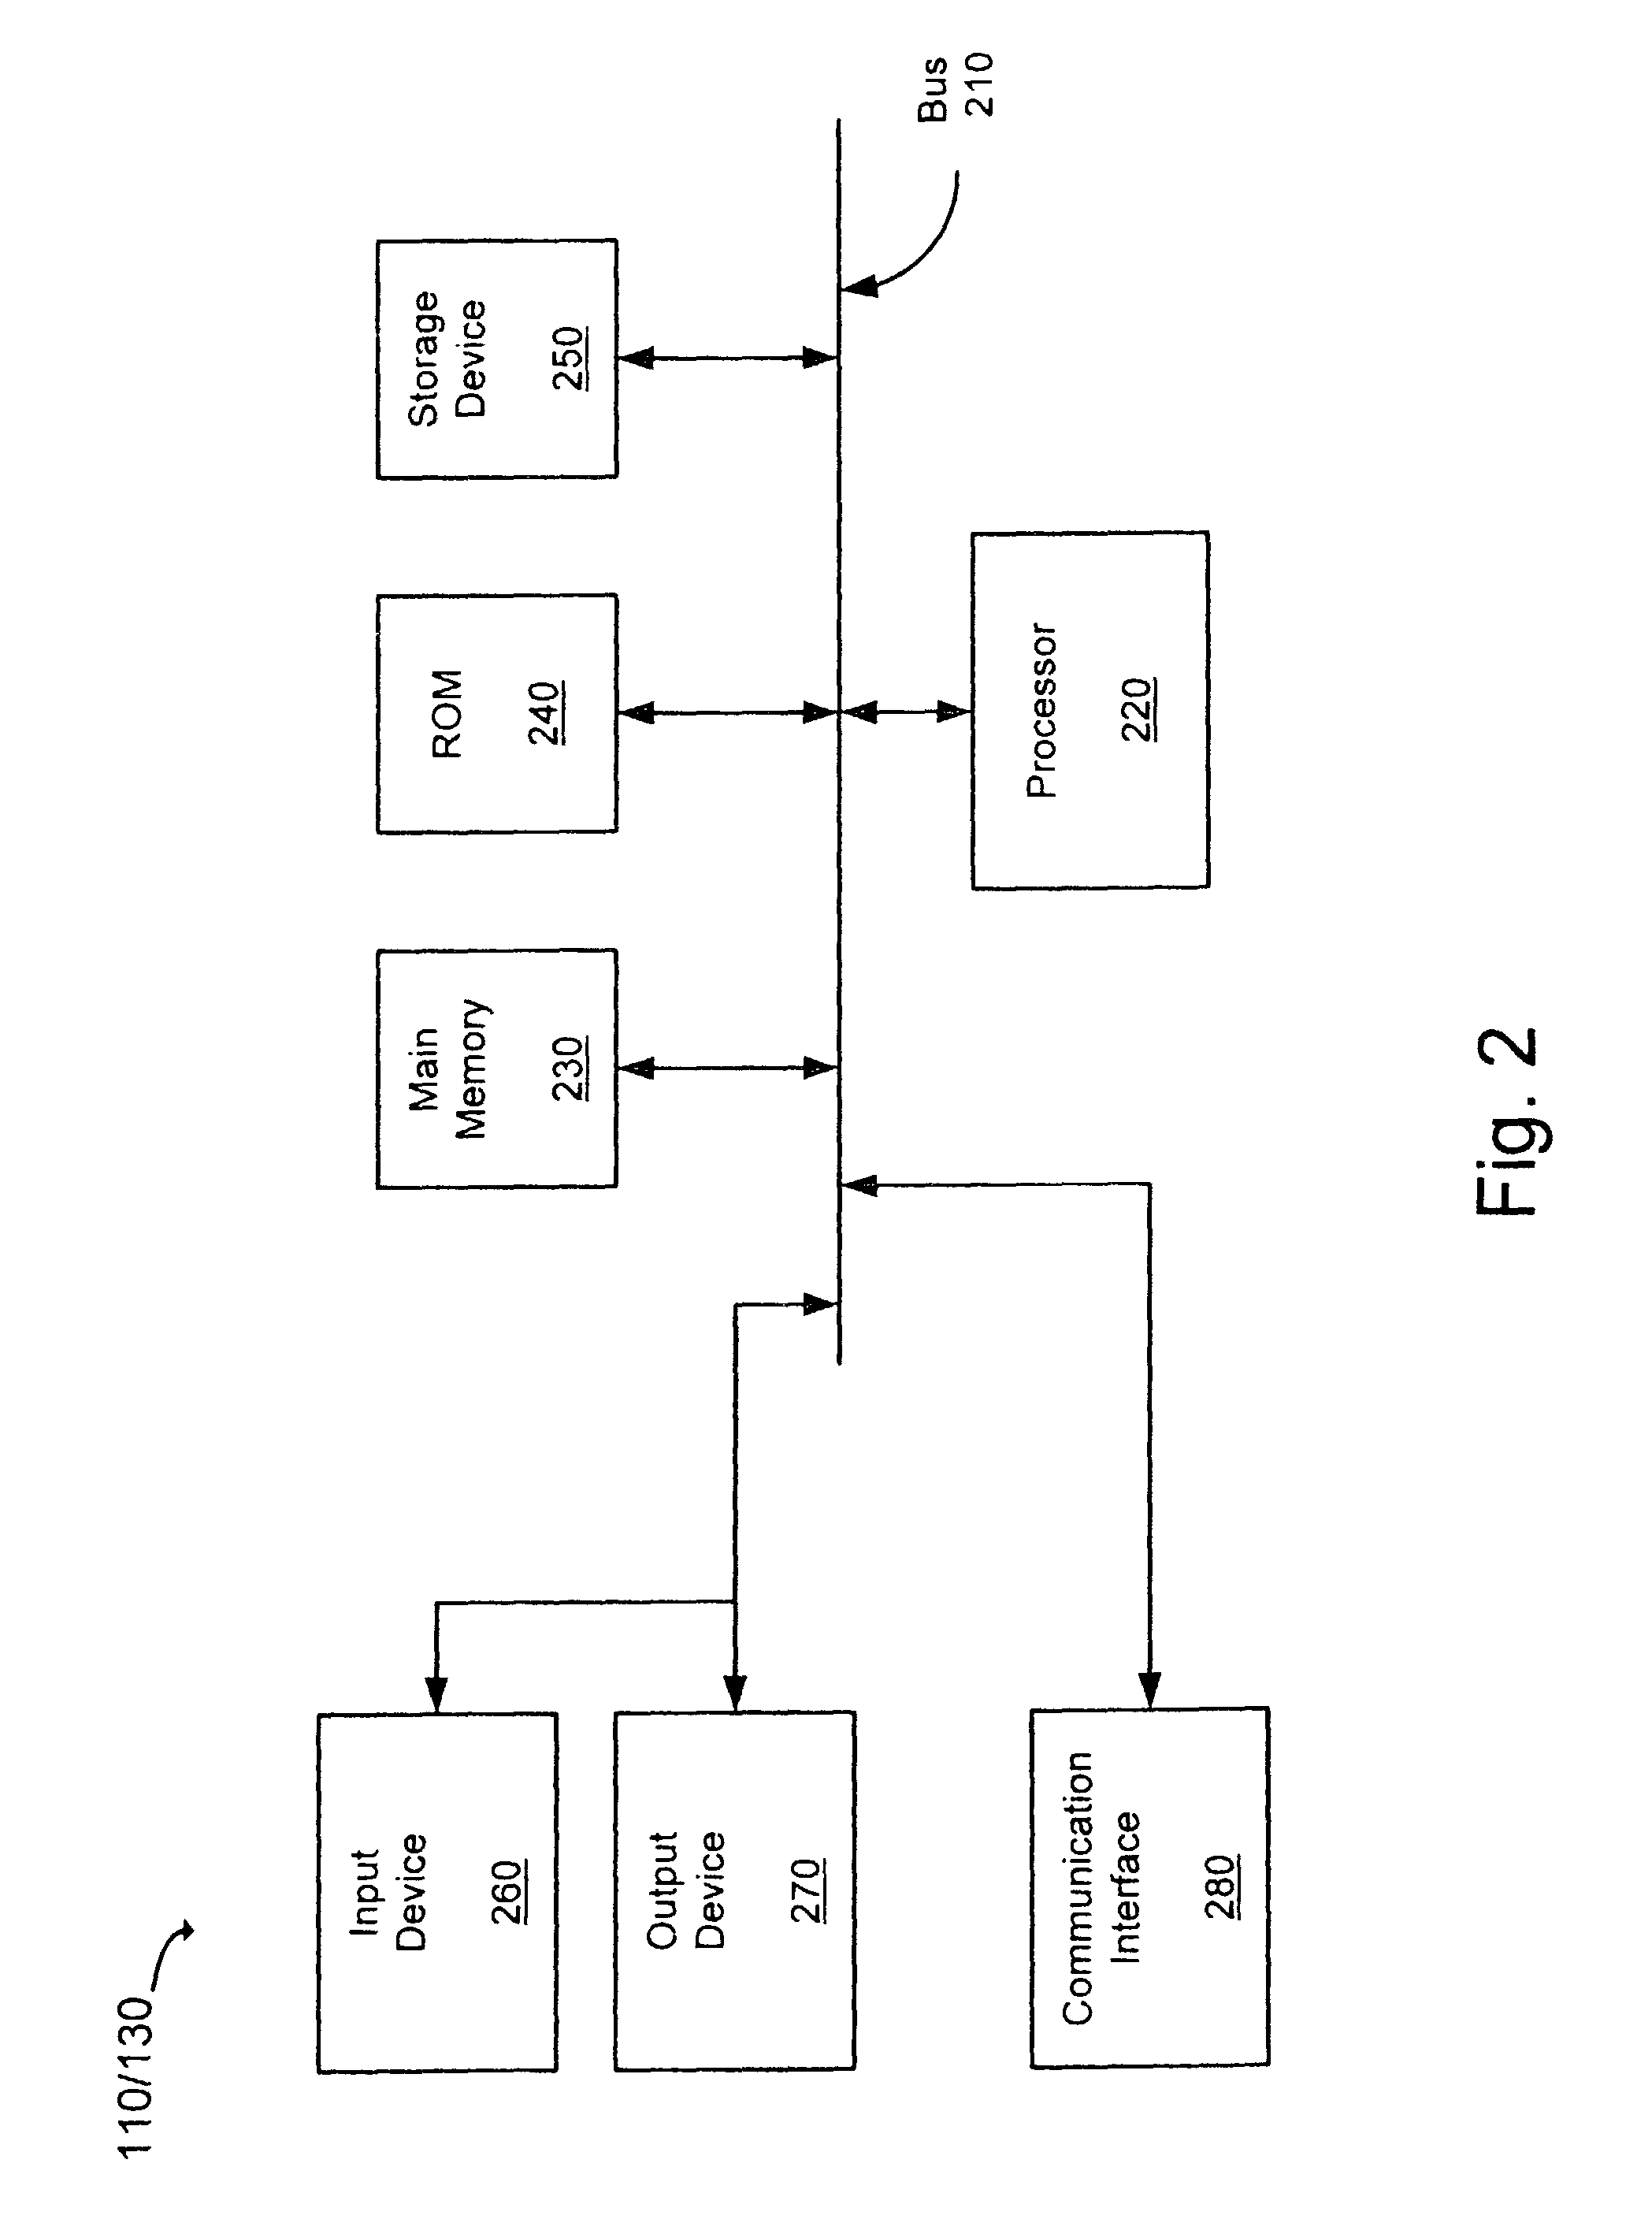 Policy control and billing support for call transfer in a session initiation protocol (SIP) network